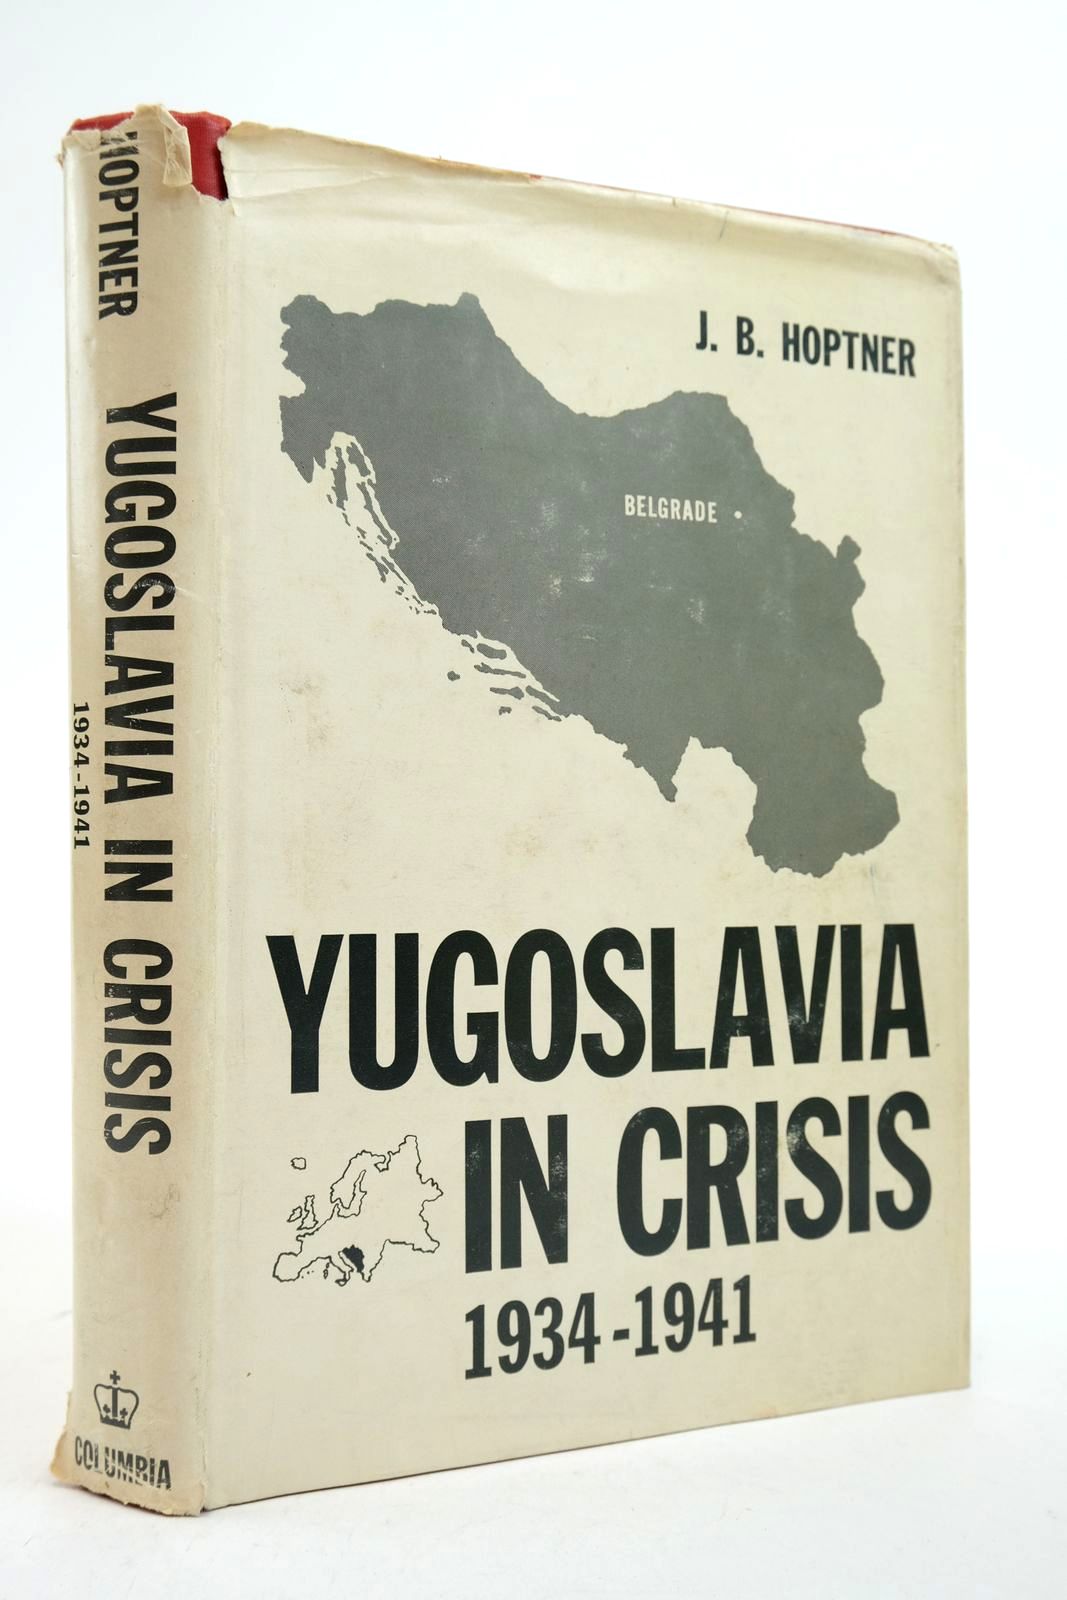 Photo of YUGOLSLAVIA IN CRISIS 1934-1941 written by Hoptner, J.B. published by Columbia University Press (STOCK CODE: 2139440)  for sale by Stella & Rose's Books